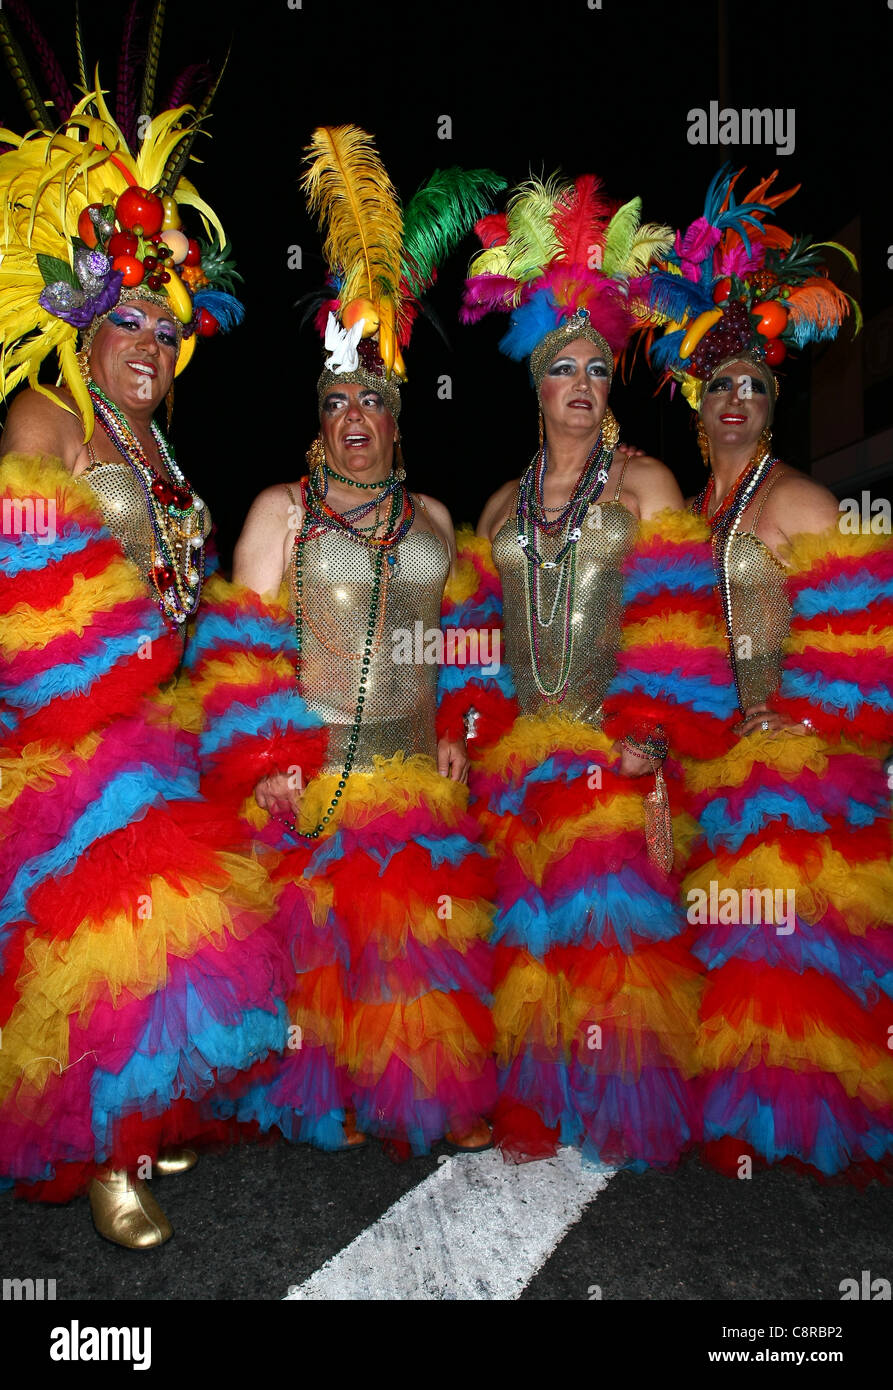 DRAG QUEENS IN COSTUME 2011 WEST HOLLYWOOD COSTUME CARNAVAL LOS ANGELES CALIFORNIA USA 31 October 2011 Stock Photo